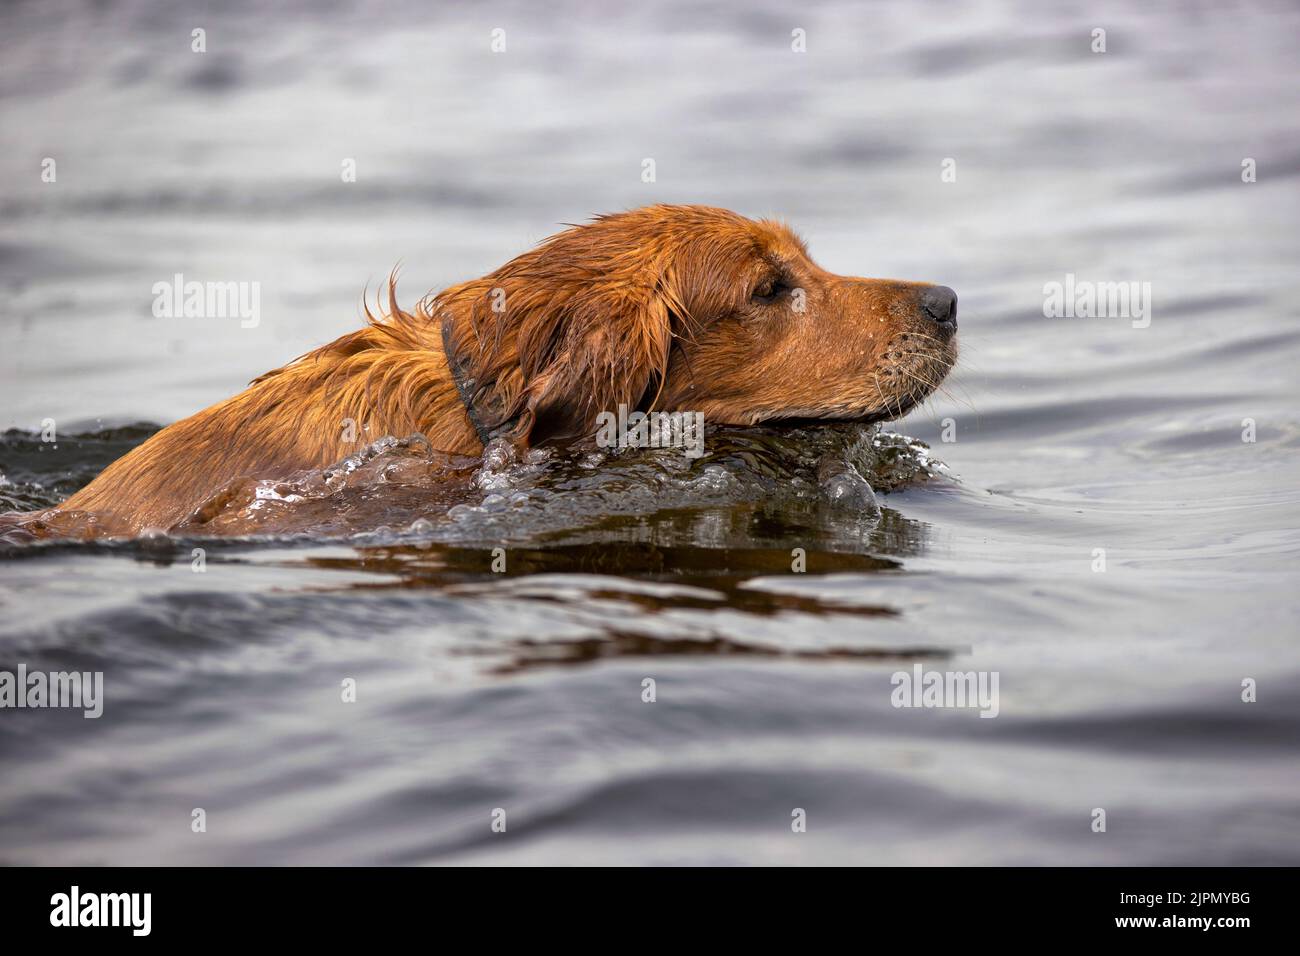 Golden retriever dog swimming in a lake. Stock Photo